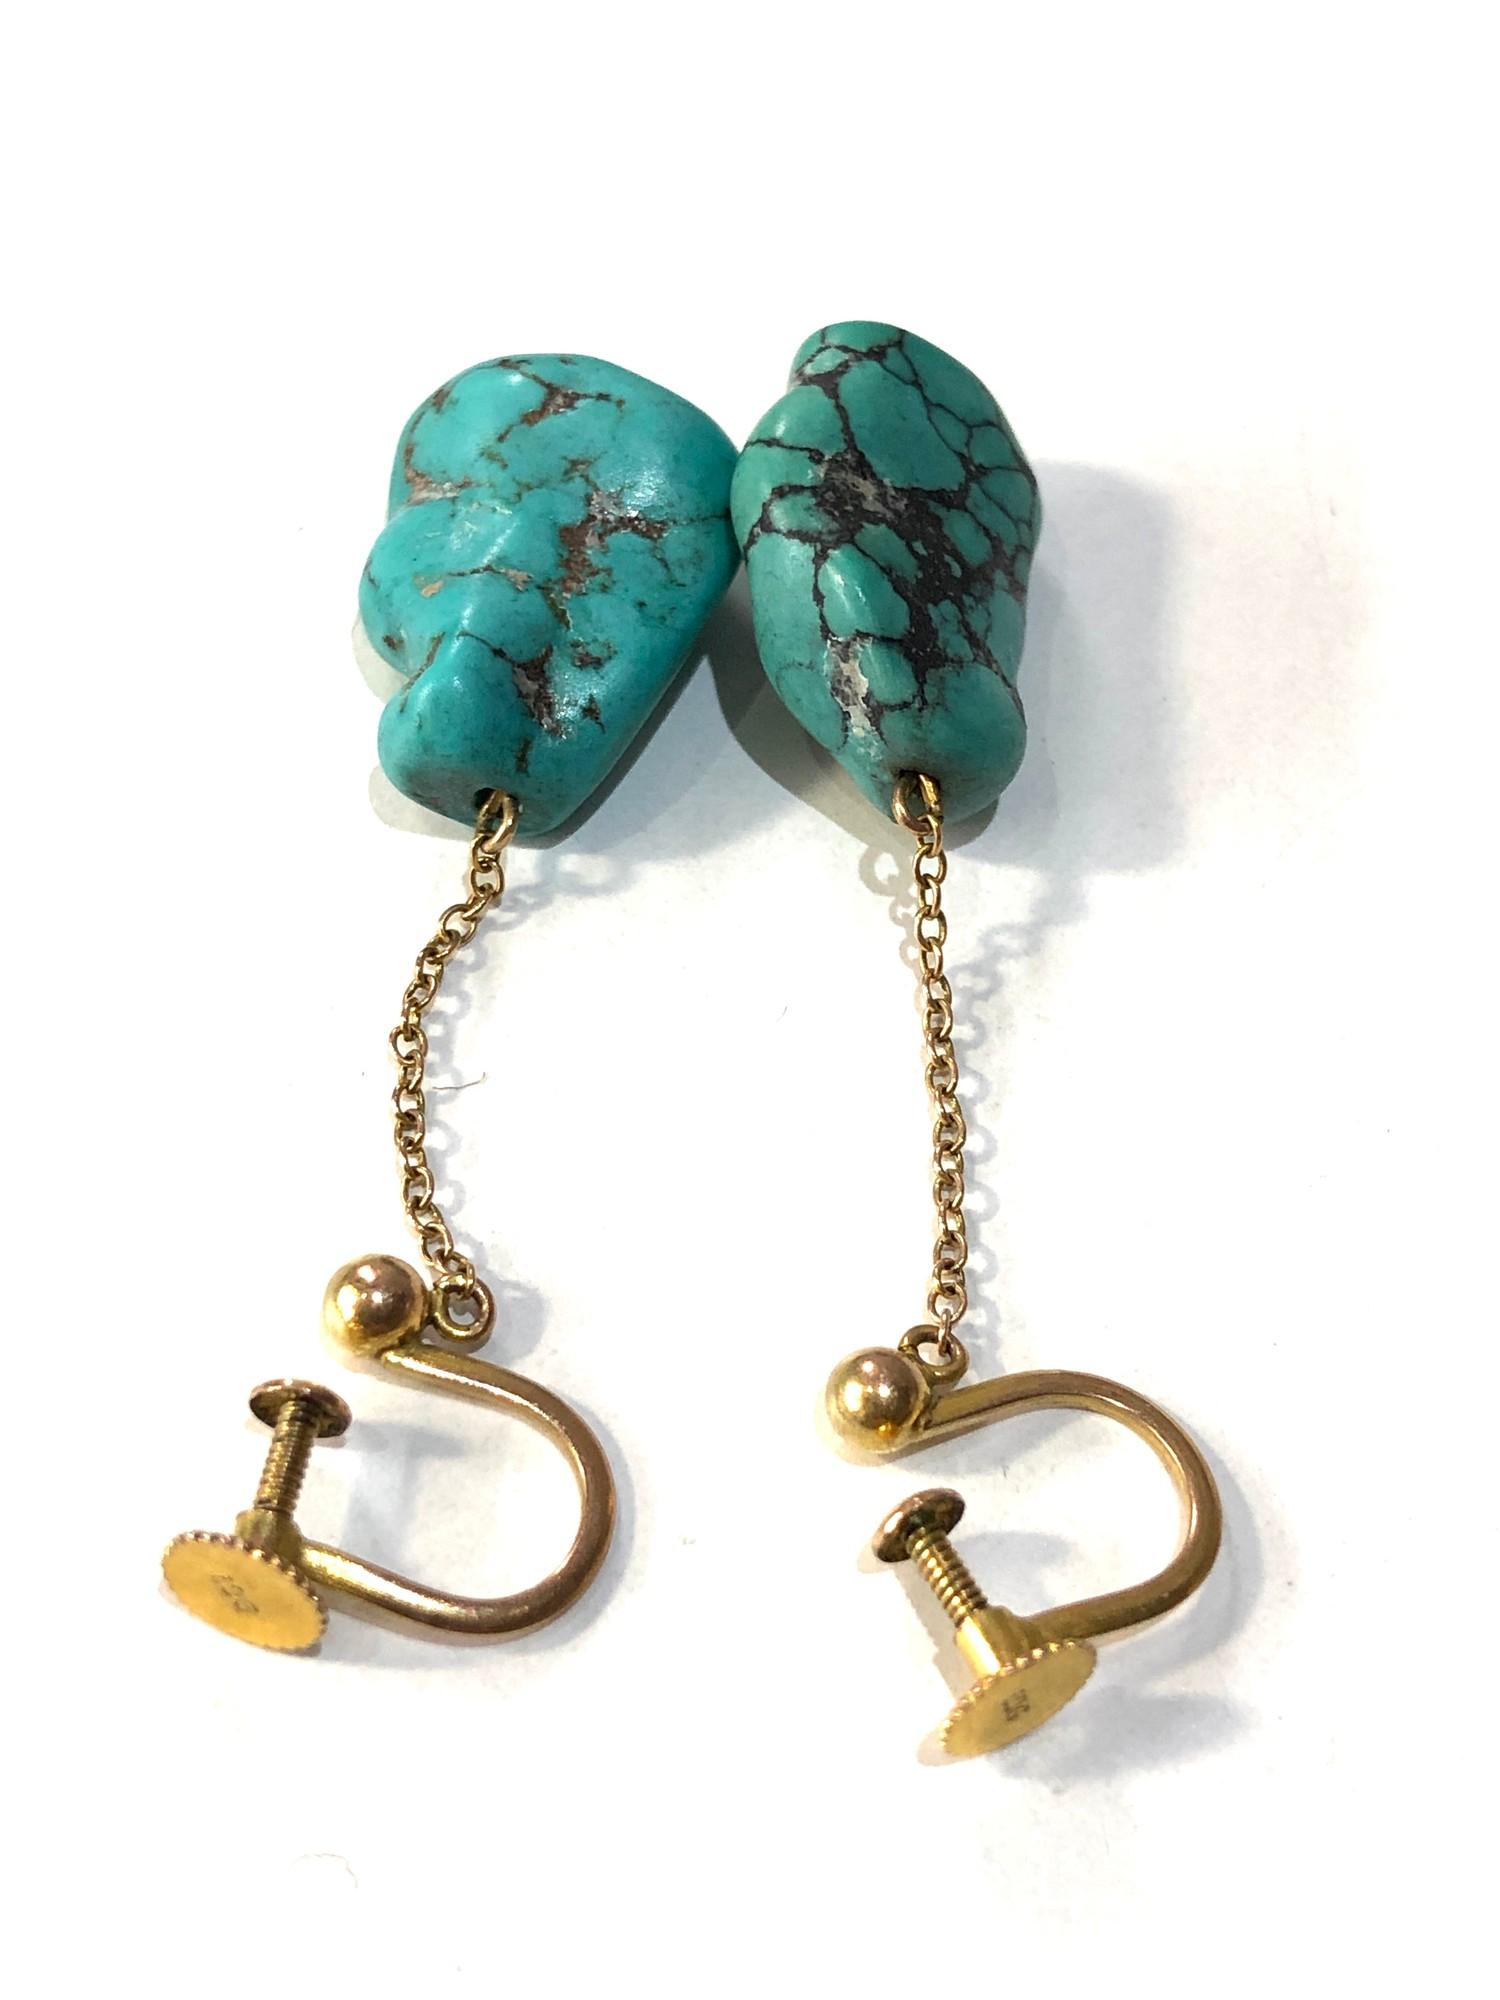 Vintage 9ct Gold and Matrix Turquoise drop earrings measure approx 4cm drop in good condition - Image 3 of 3